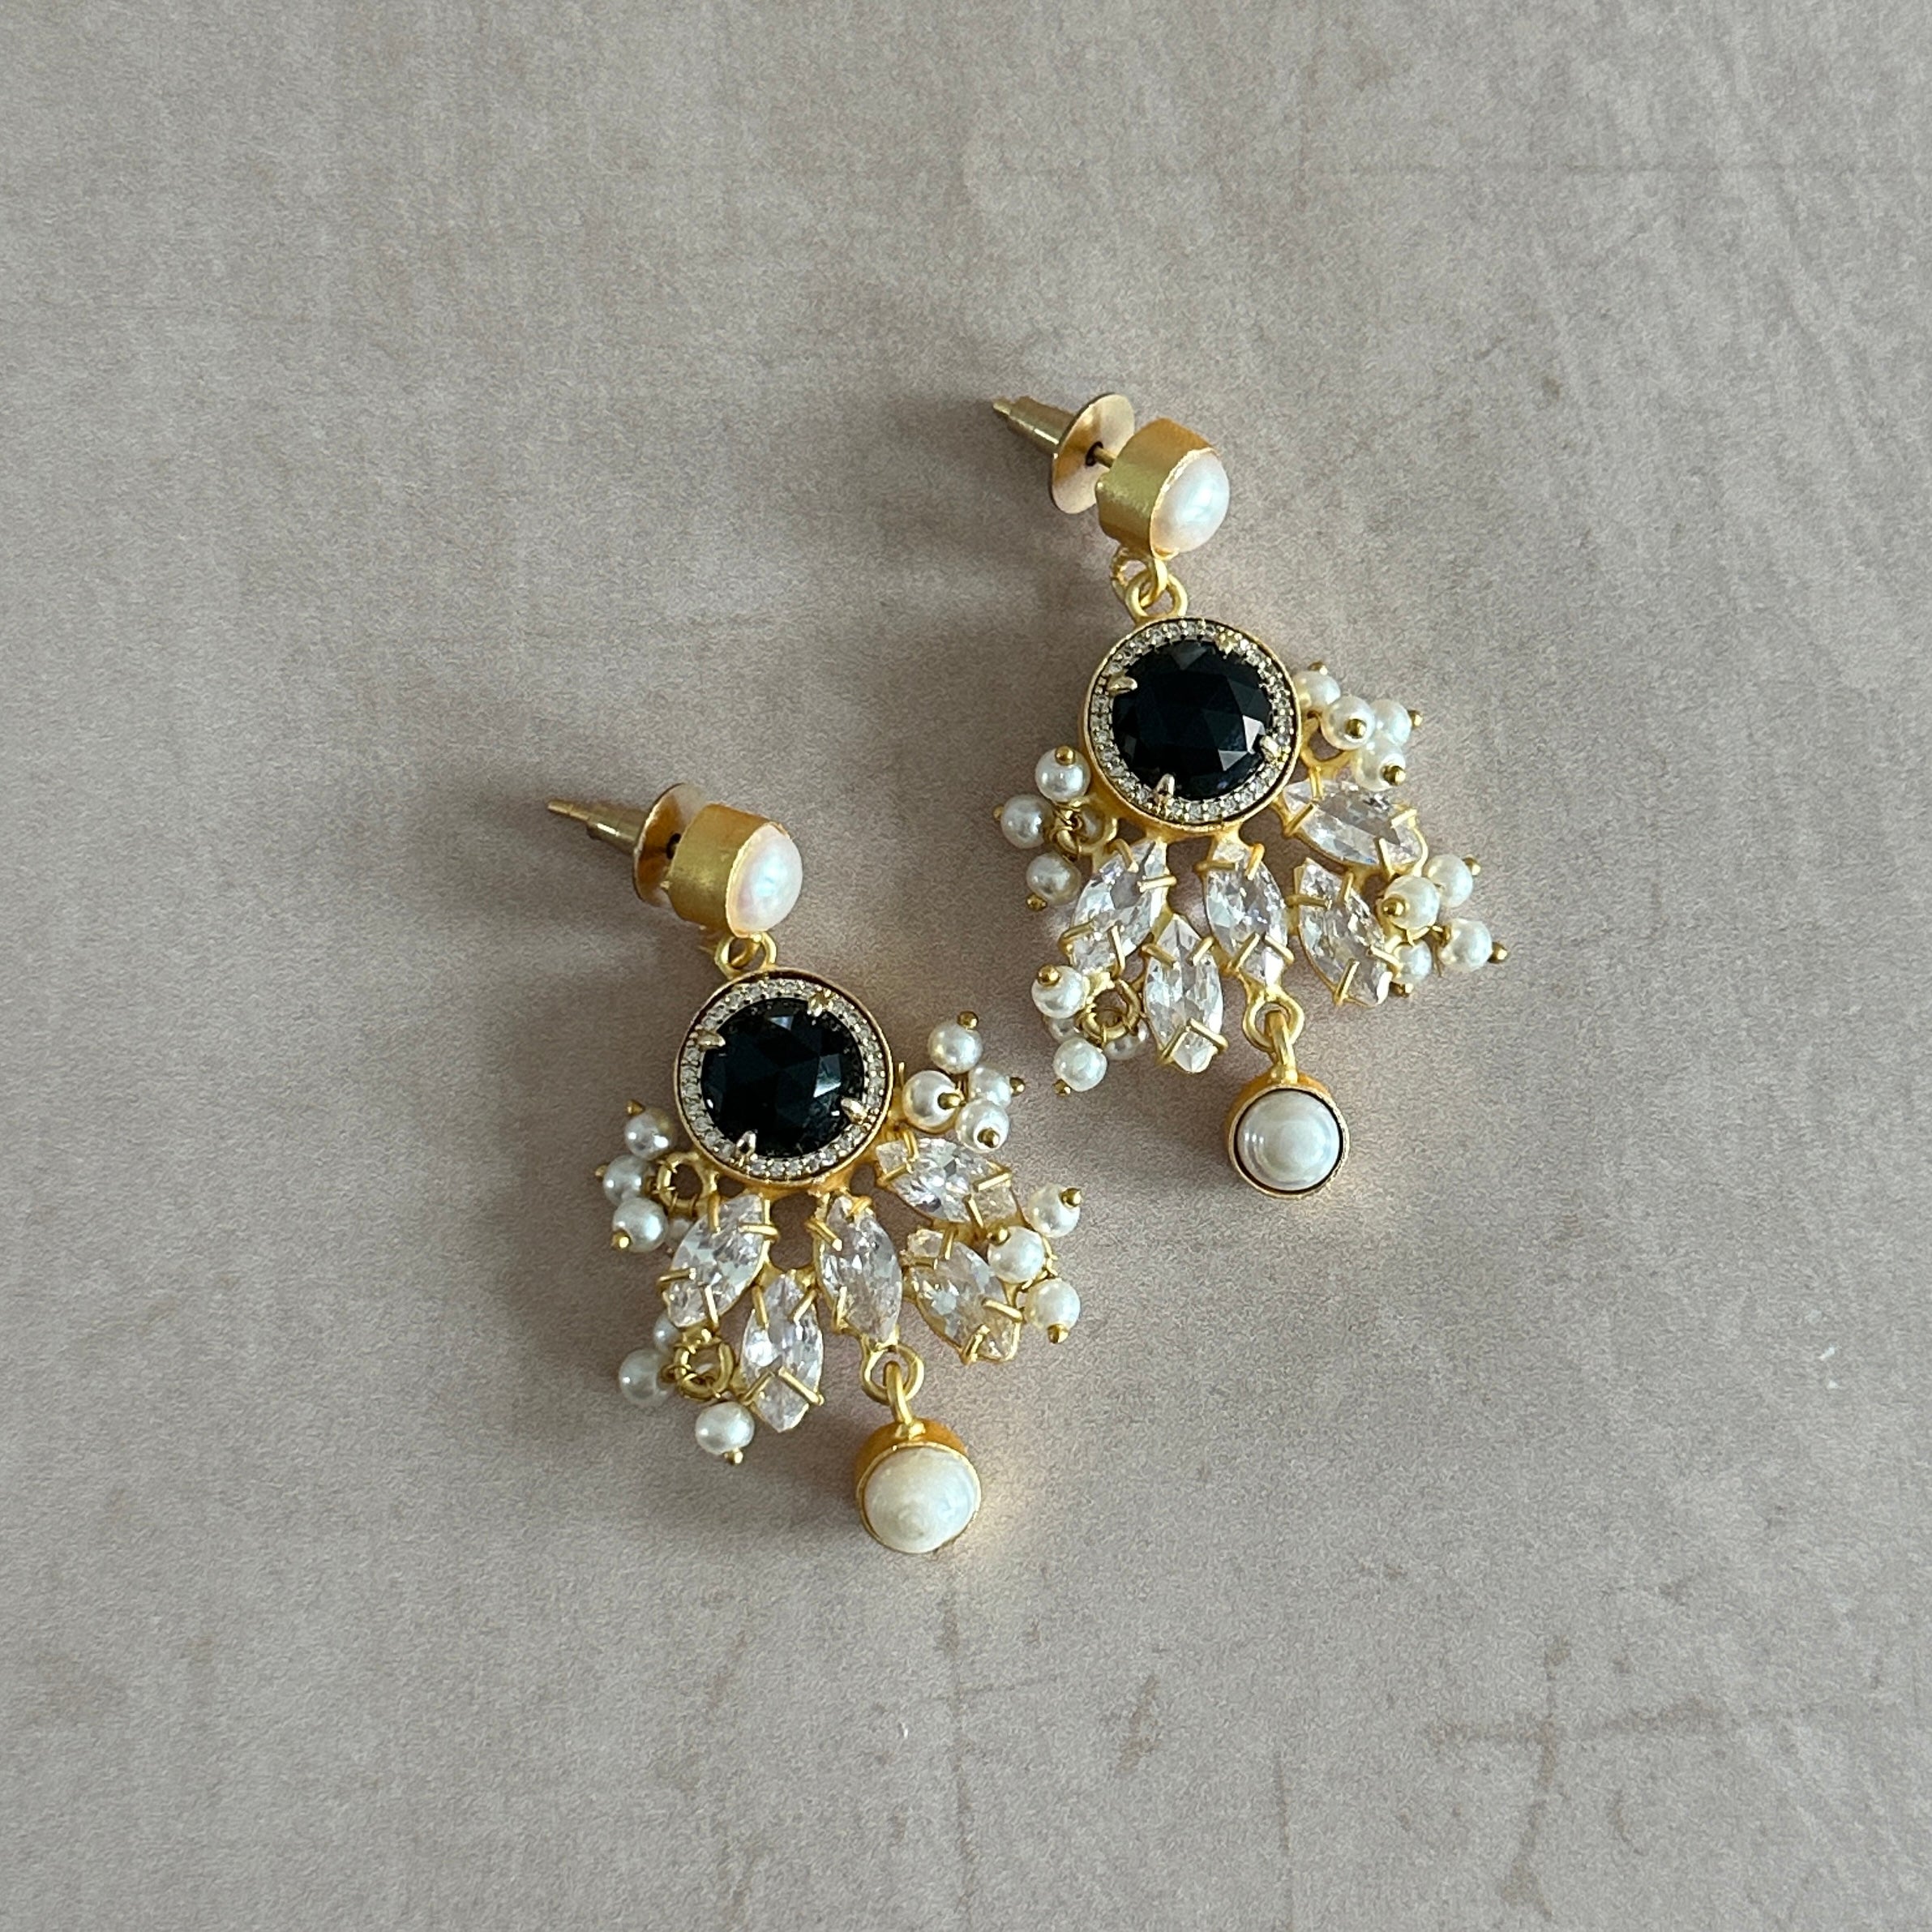 Add a touch of elegance to your look with our Black Crystal Drop Earrings. Made with stunning cubic zirconia and delicate pearl accents, these earrings are perfect for any occasion. Get the sparkle and sophistication you want in one beautiful piece.